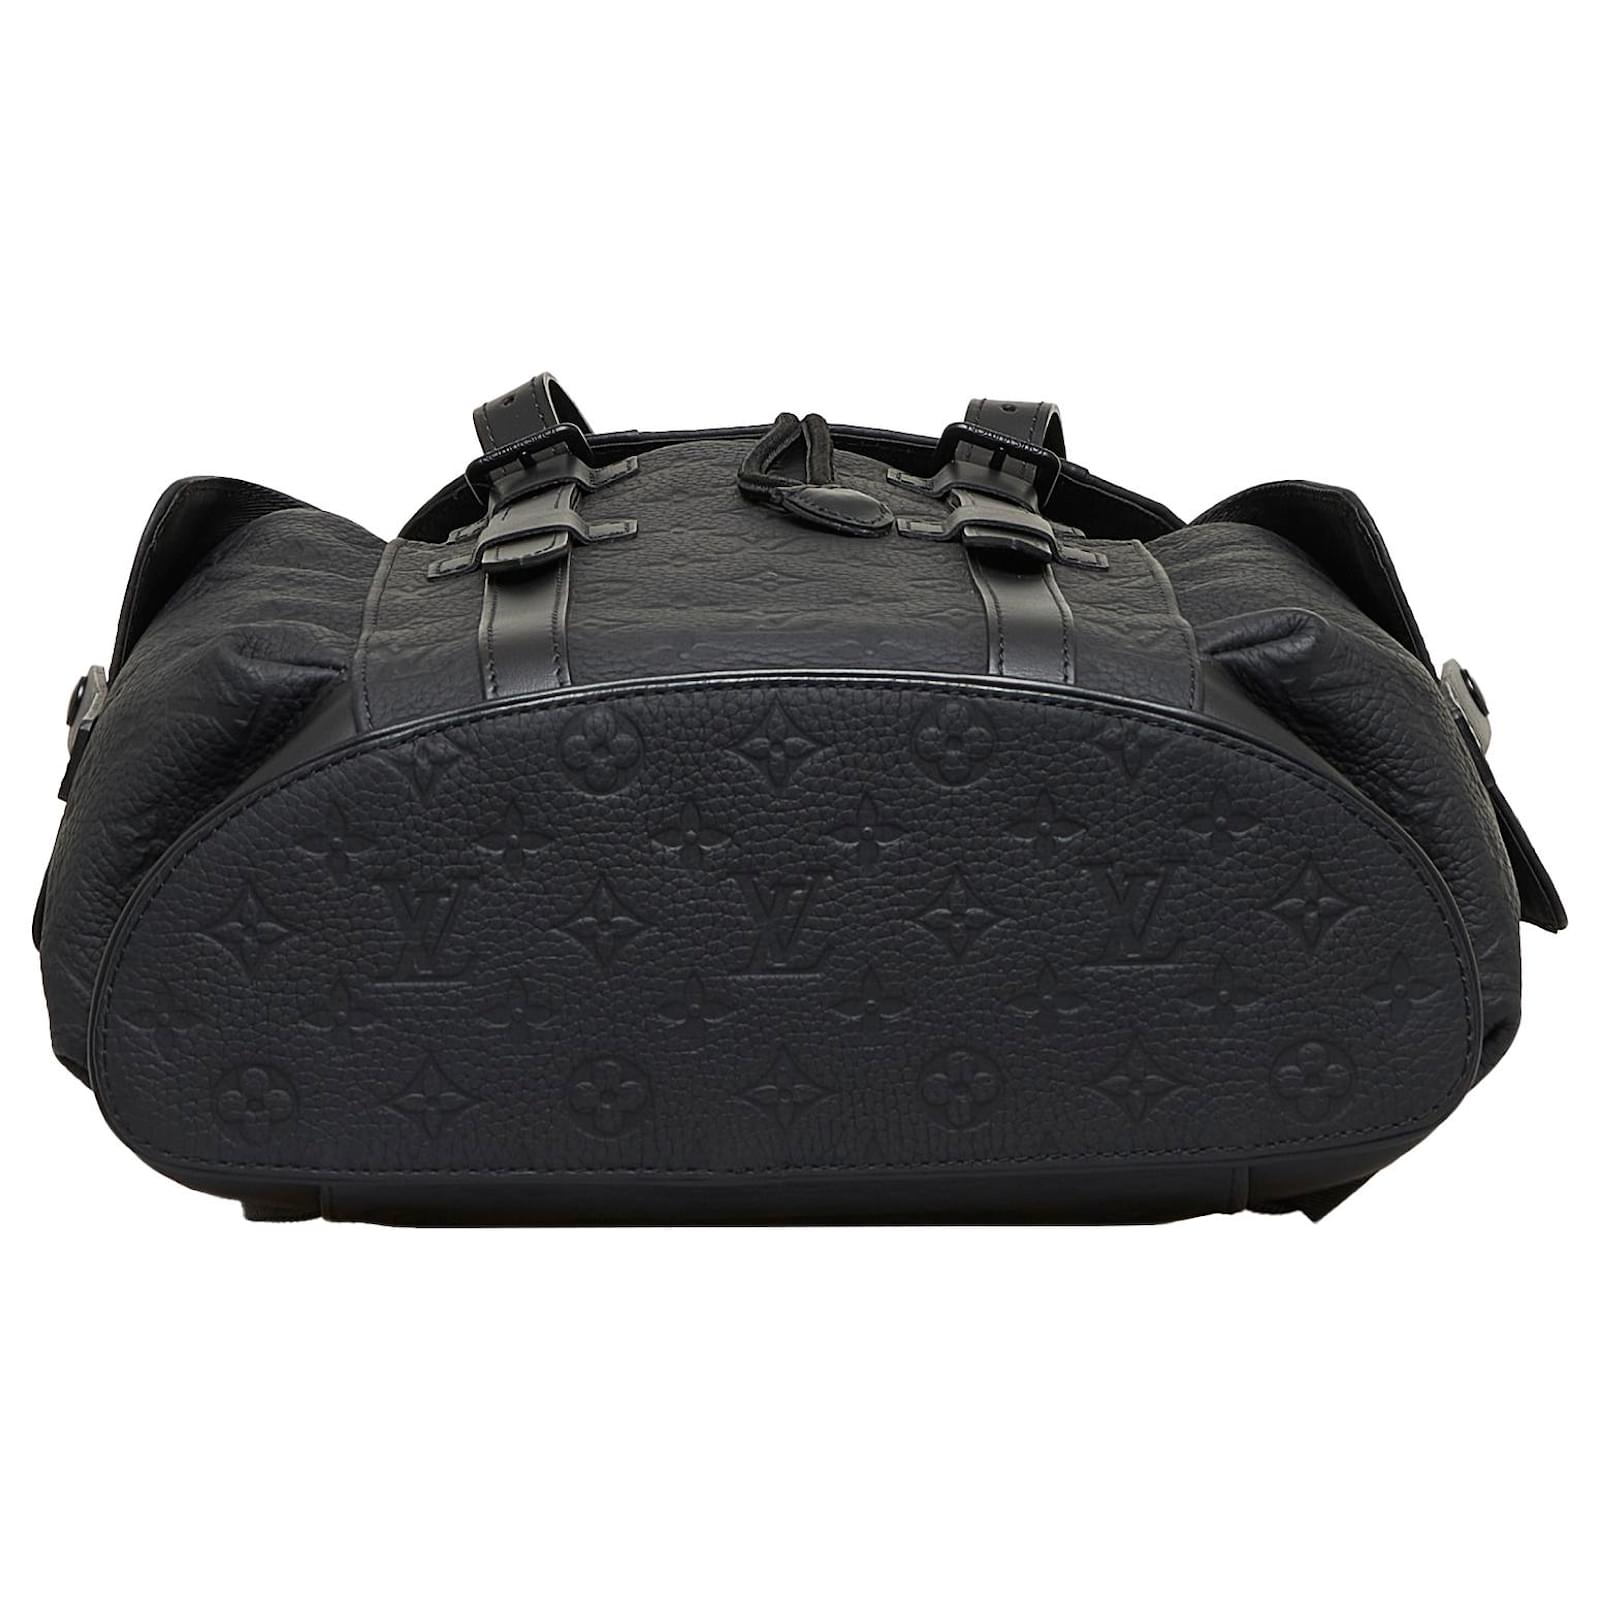 Louis+Vuitton+Christopher+Backpack+PM+Black+Leather+Monogram+